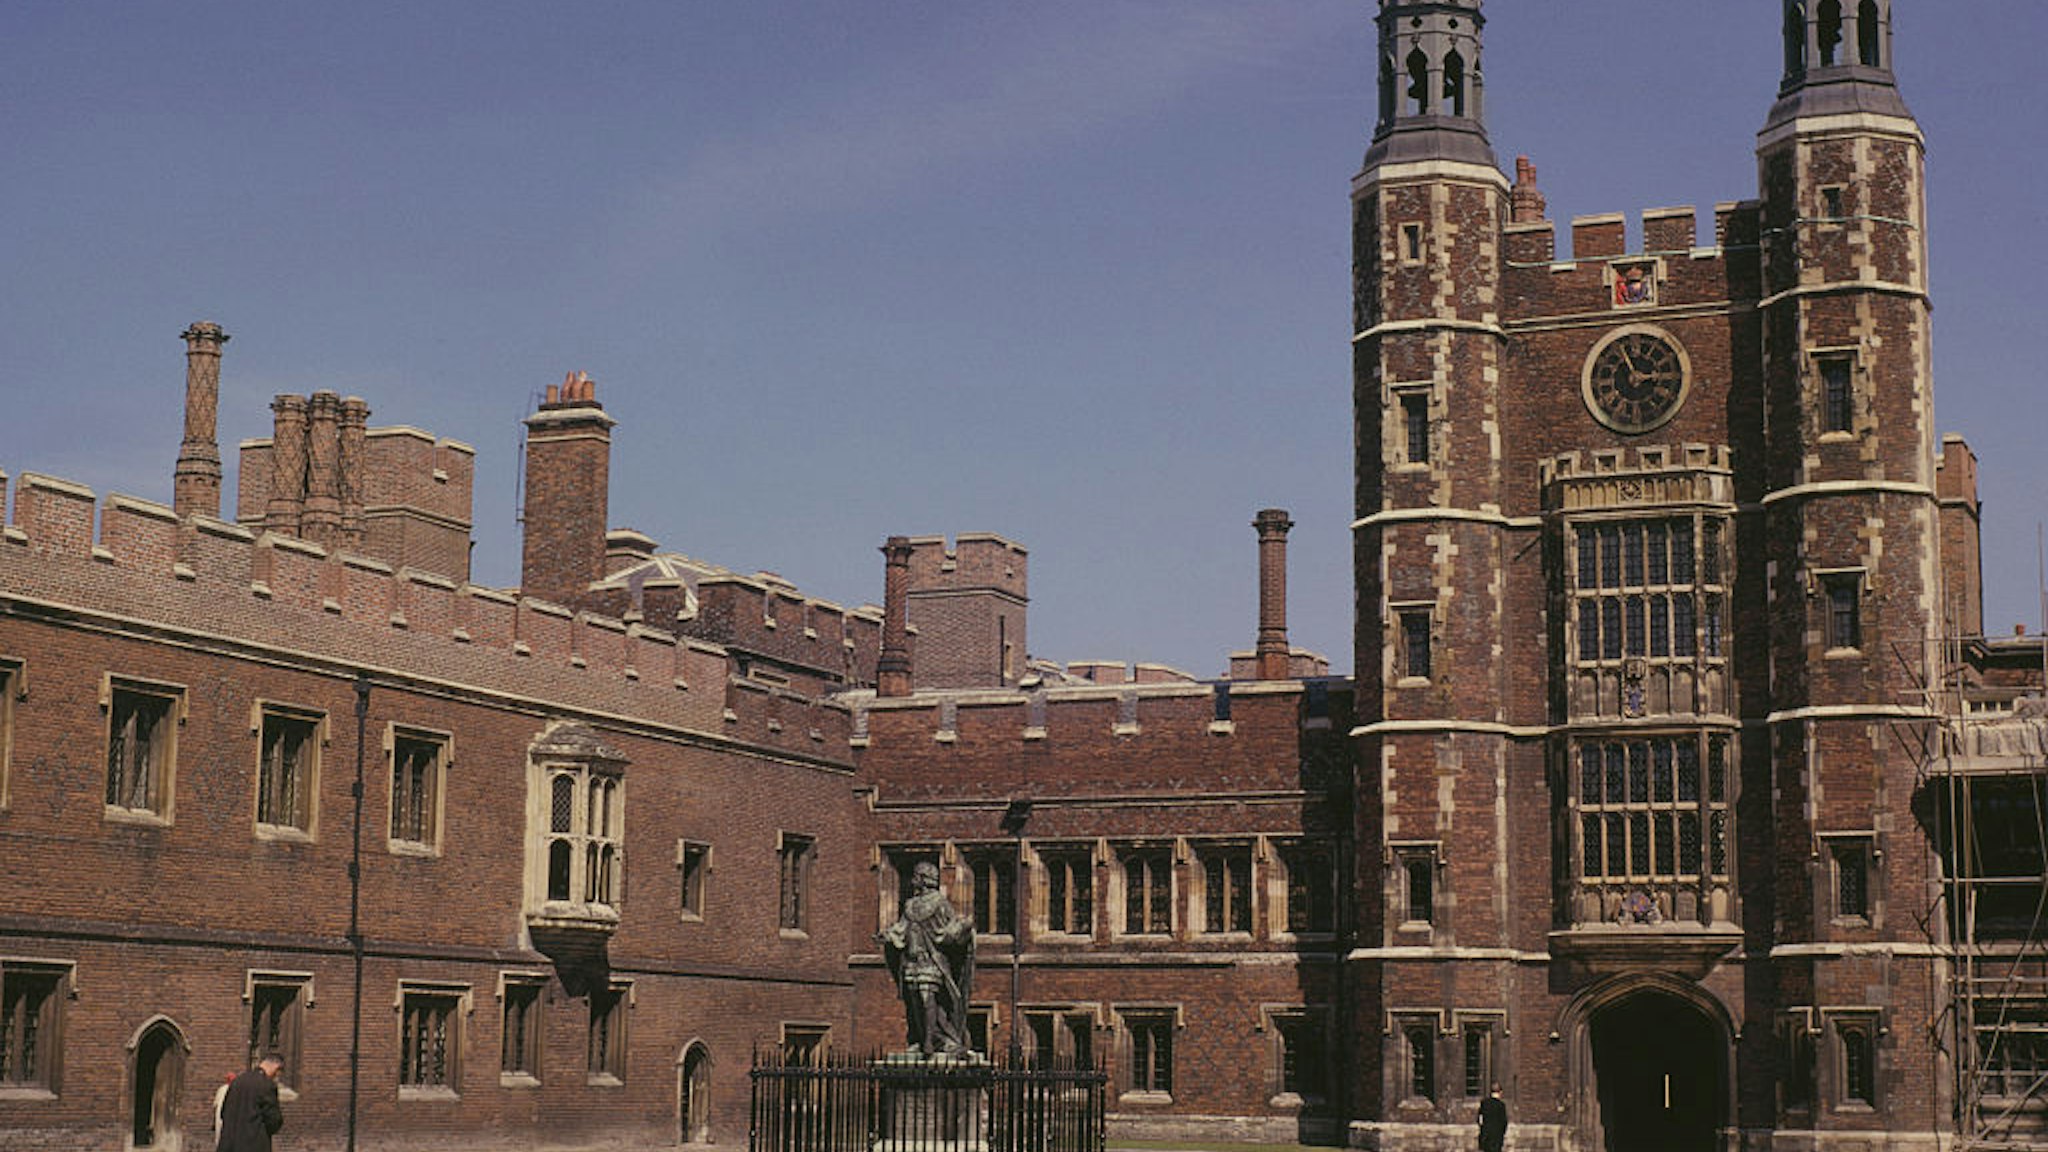 A view of Eton College, Eton, Berkshire, June 1962. (Photo by Archive Photos/Getty Images)